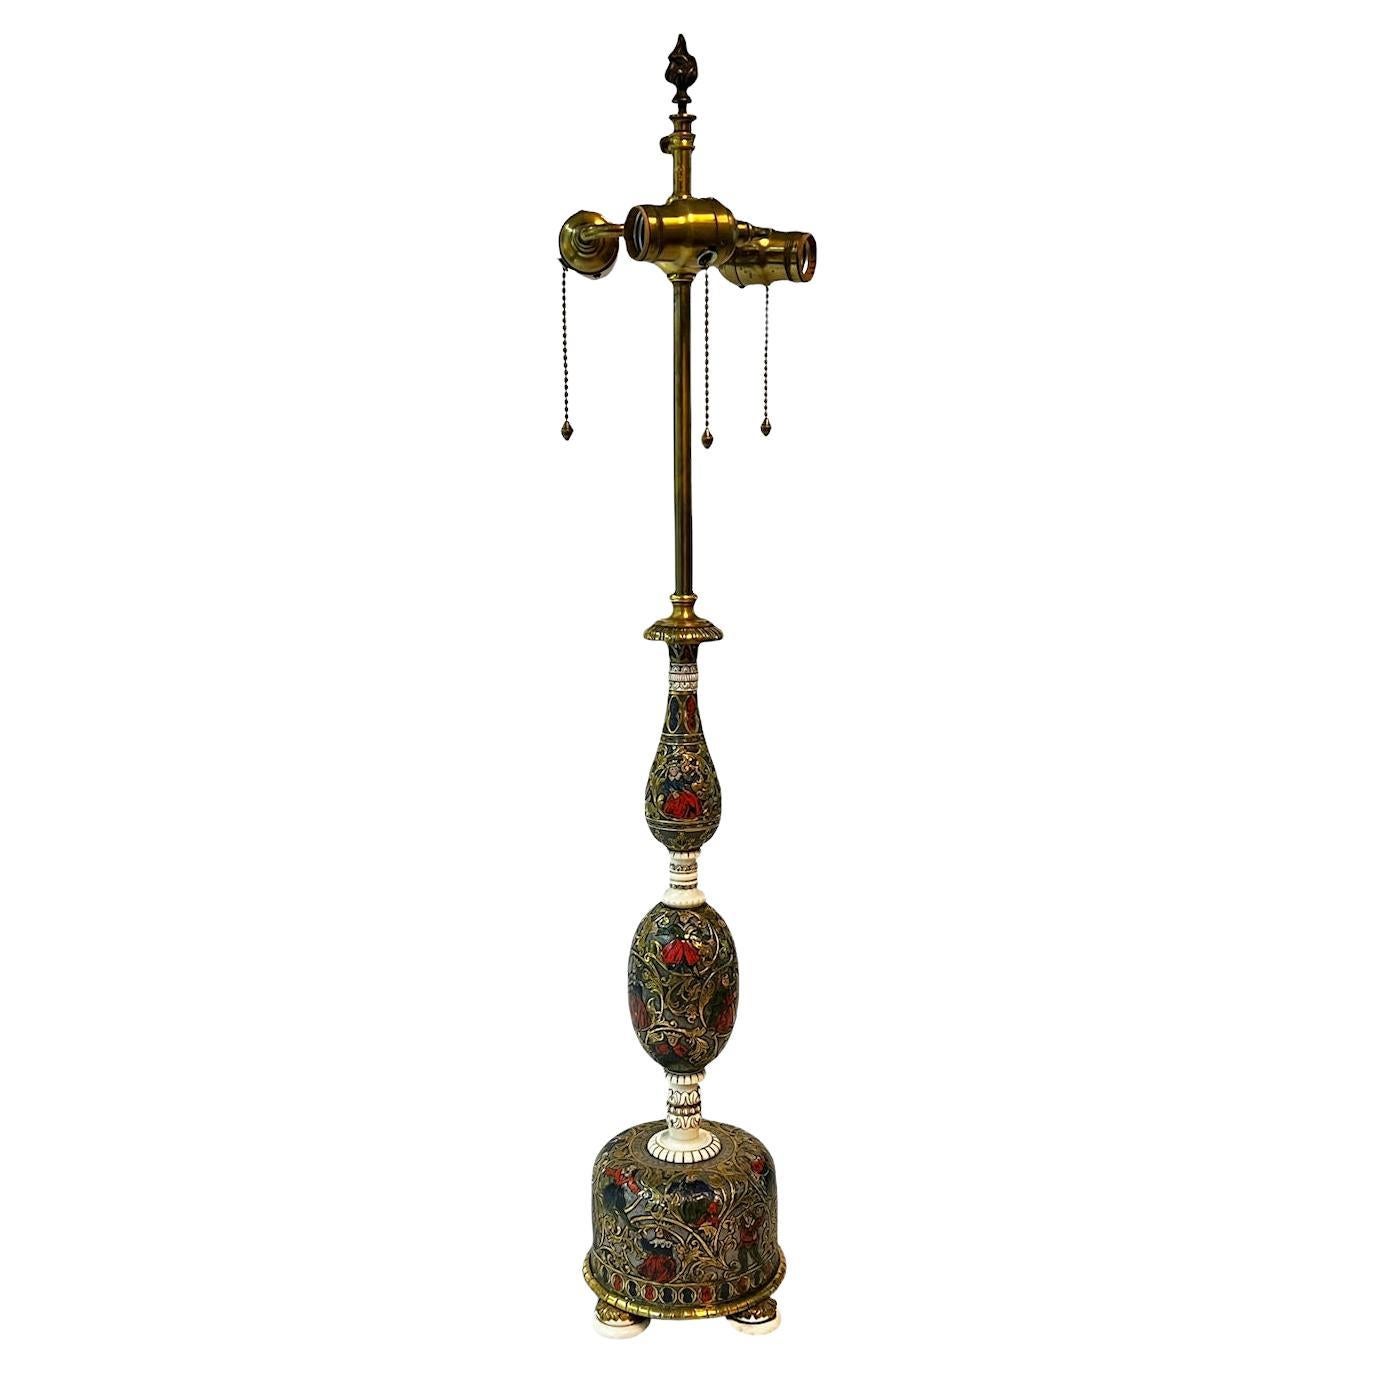 Renaissance Revival Enameled Bronze and Ivory Table Lamp by E.F. Caldwell